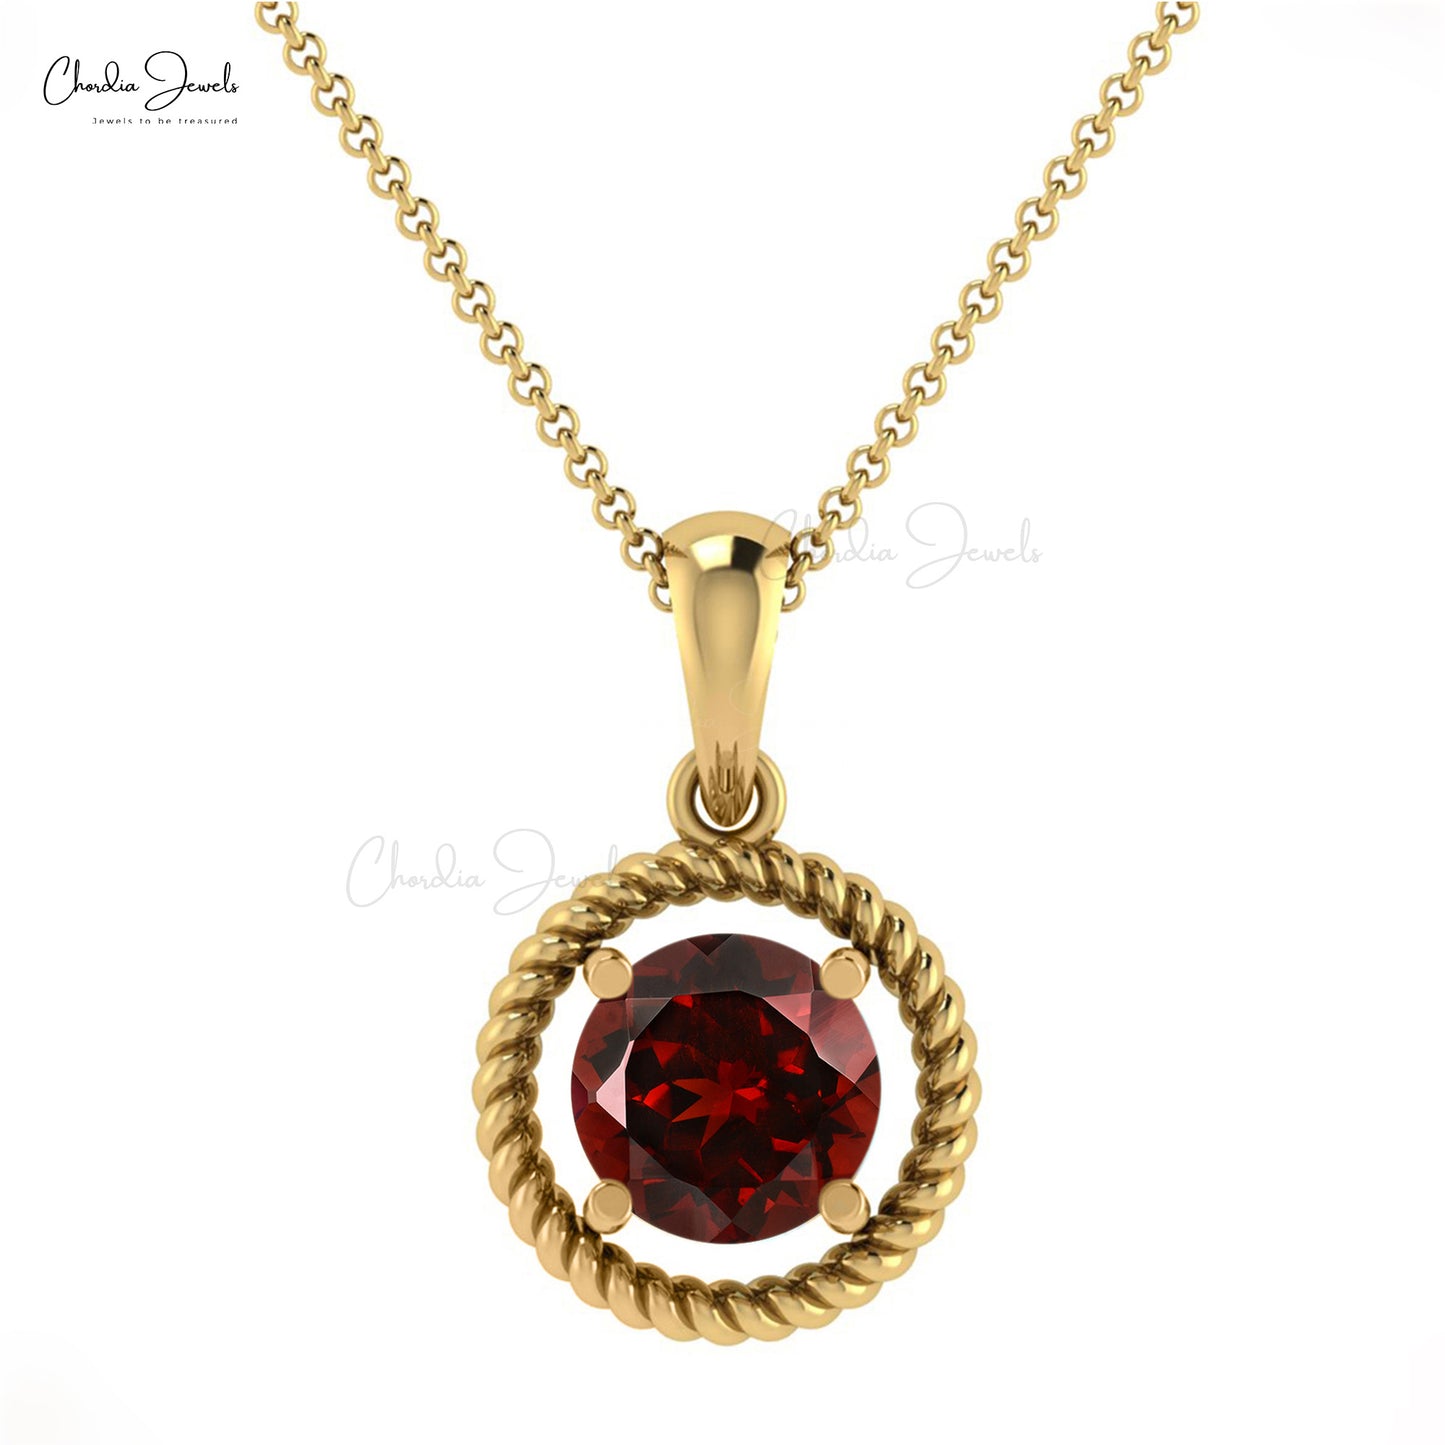 Load image into Gallery viewer, Creative Luxury Spiral Pendant Round Brilliant Cut Natural Red Garnet Pendant Necklace For Women in 14k Pure Gold Light Weight Jewelry For Gift
